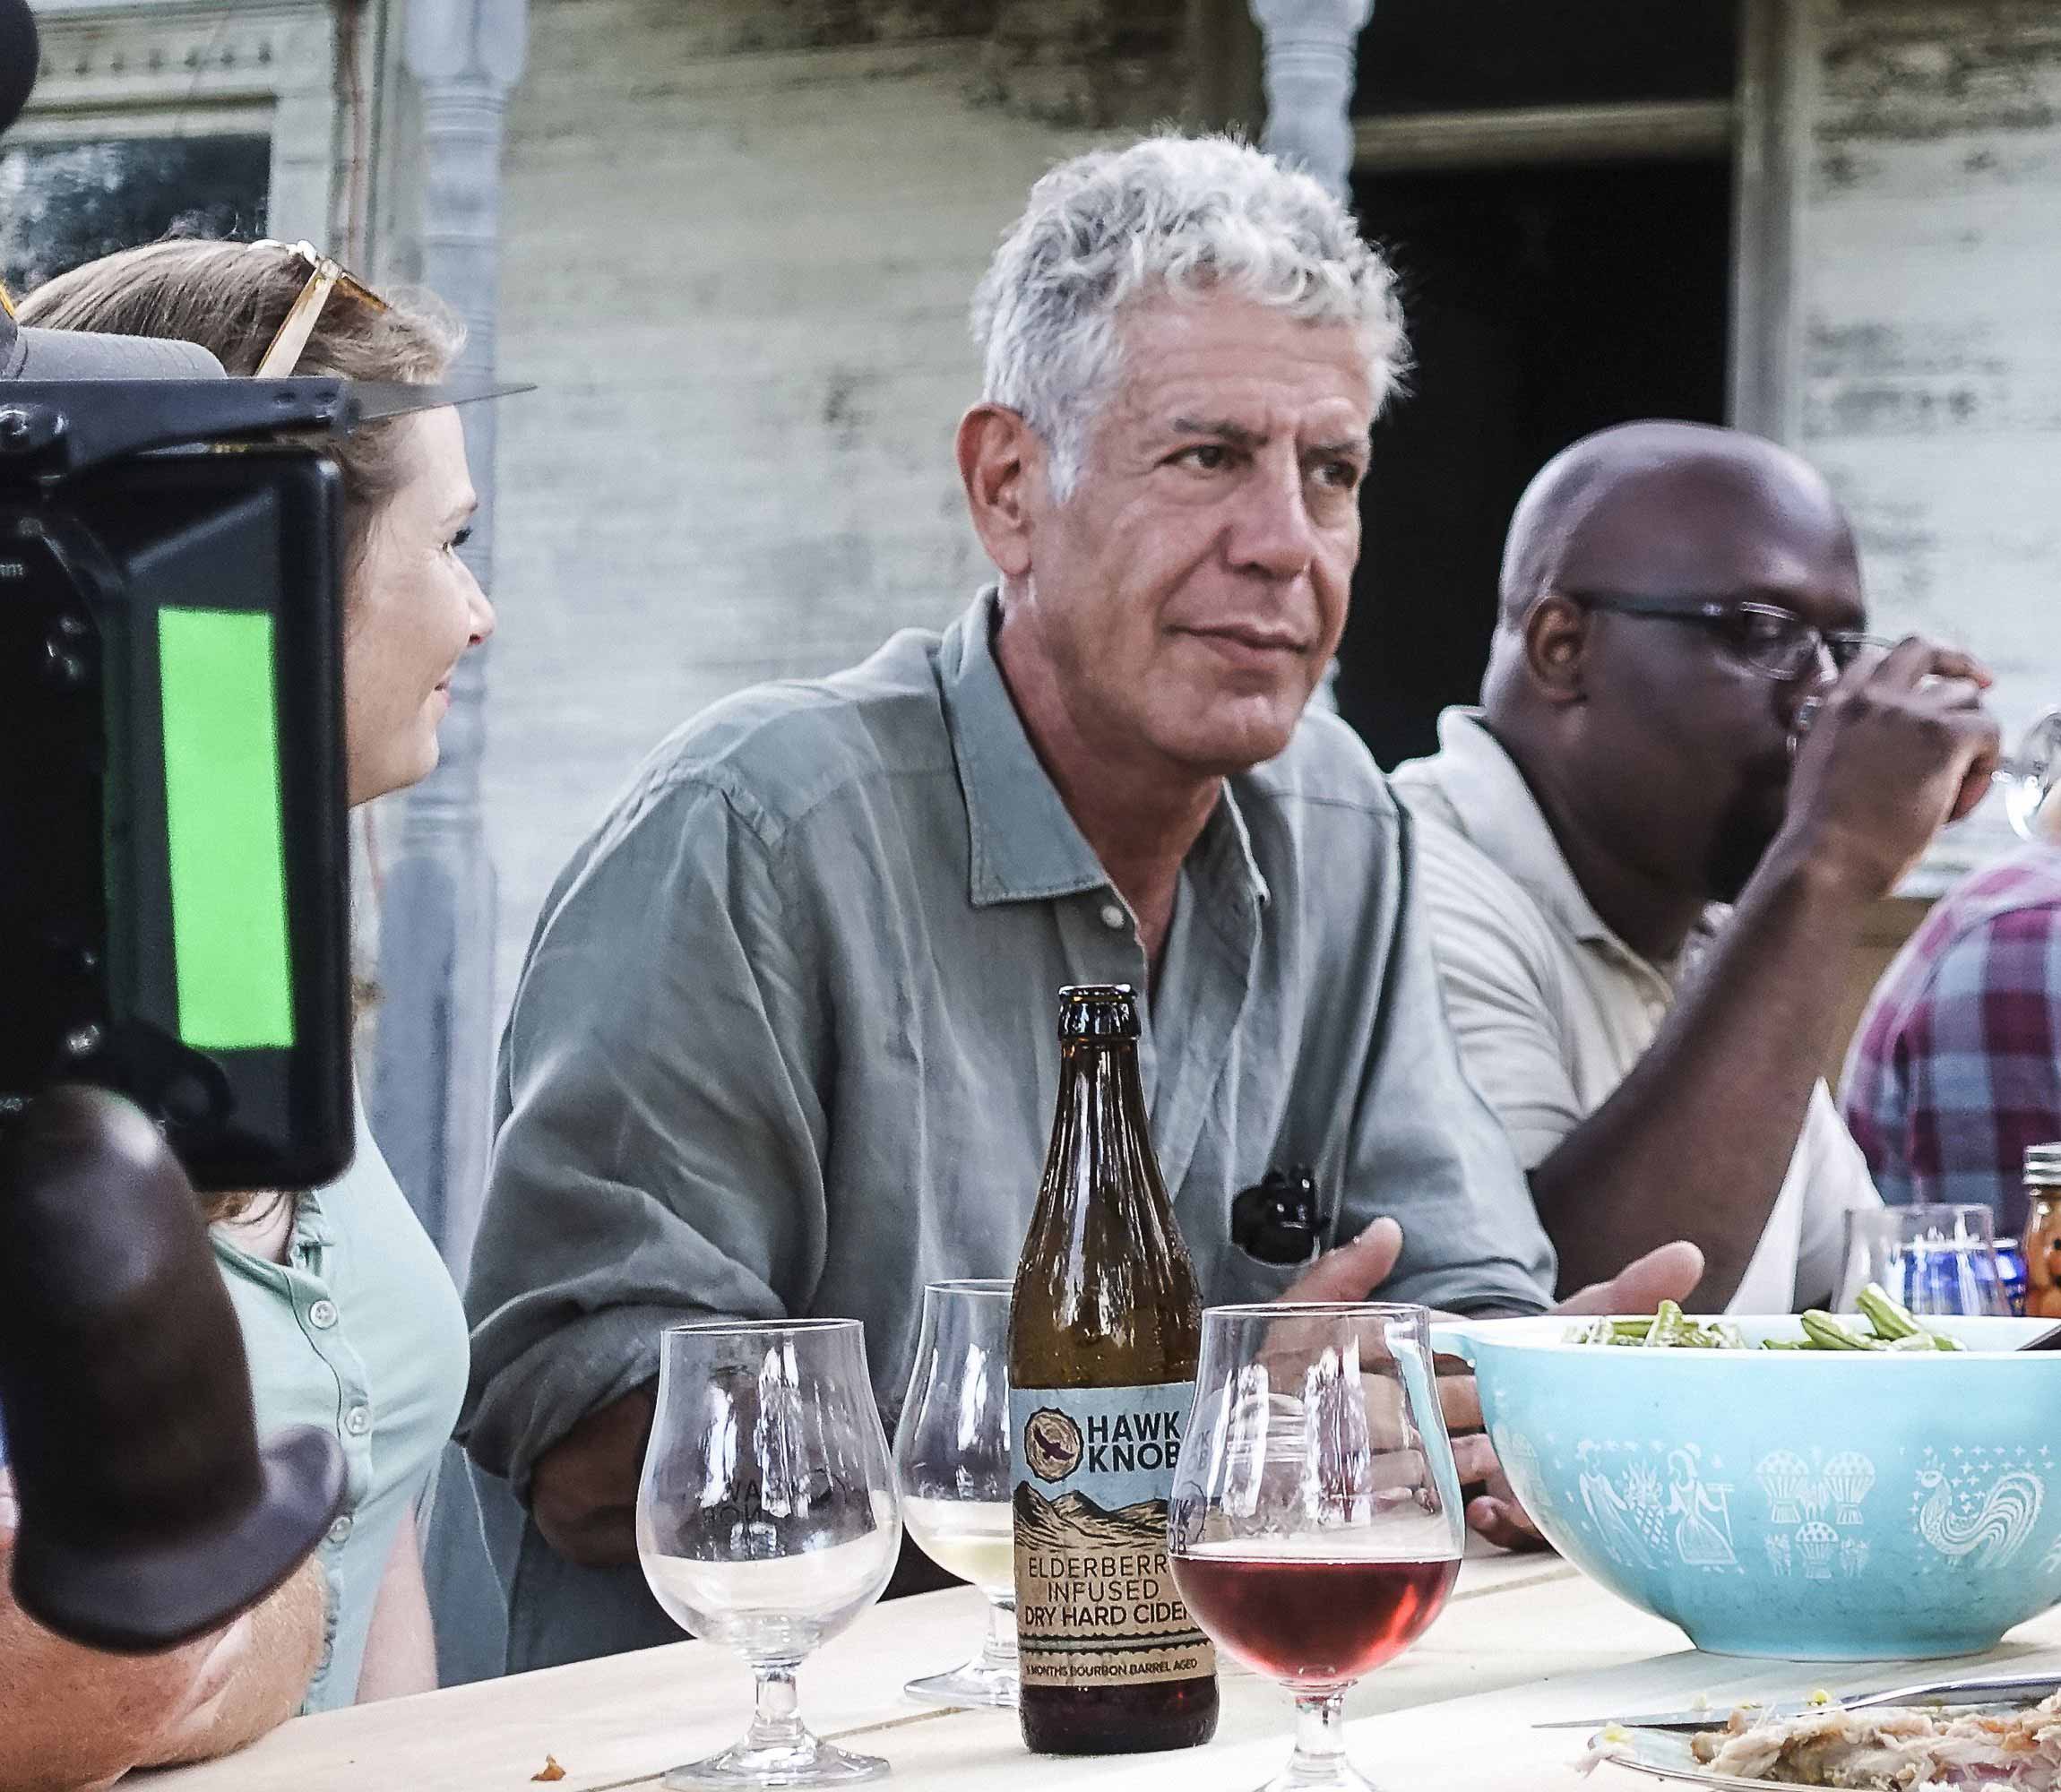 Voyage In The Footsteps Of Anthony Bourdain on A Hotel Life - featured